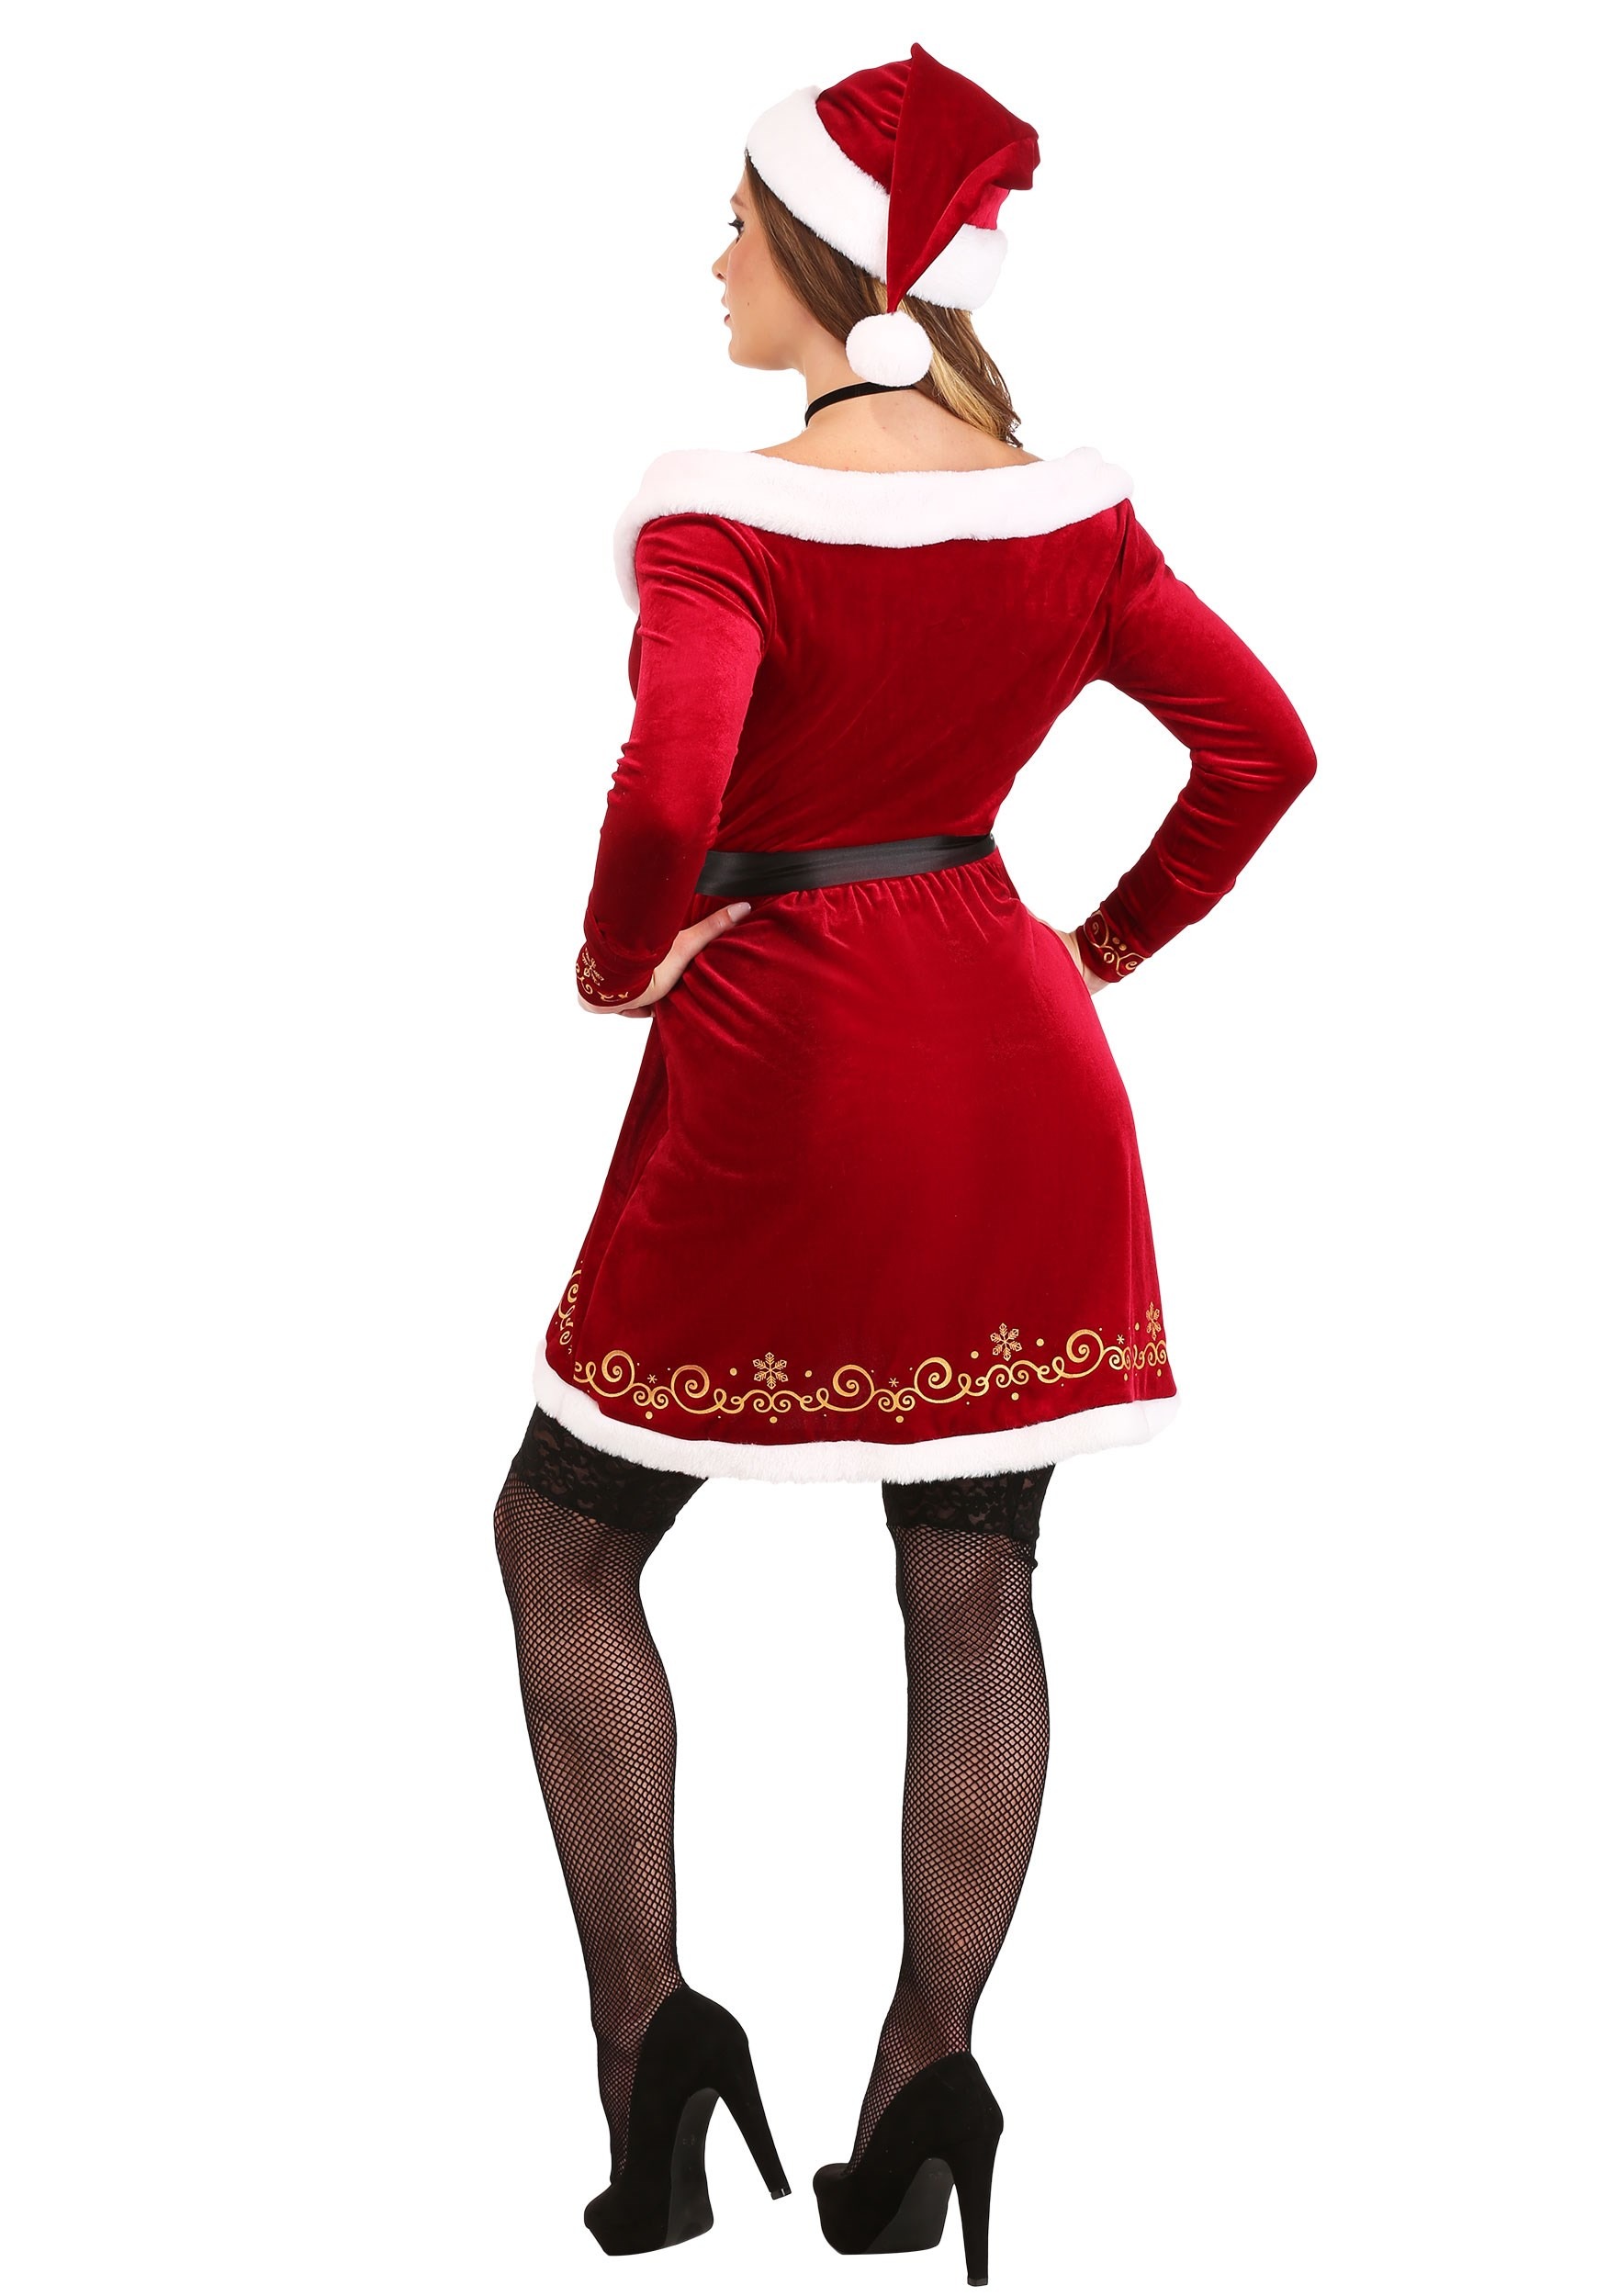 Sexy Mrs. Claus Costume For Women